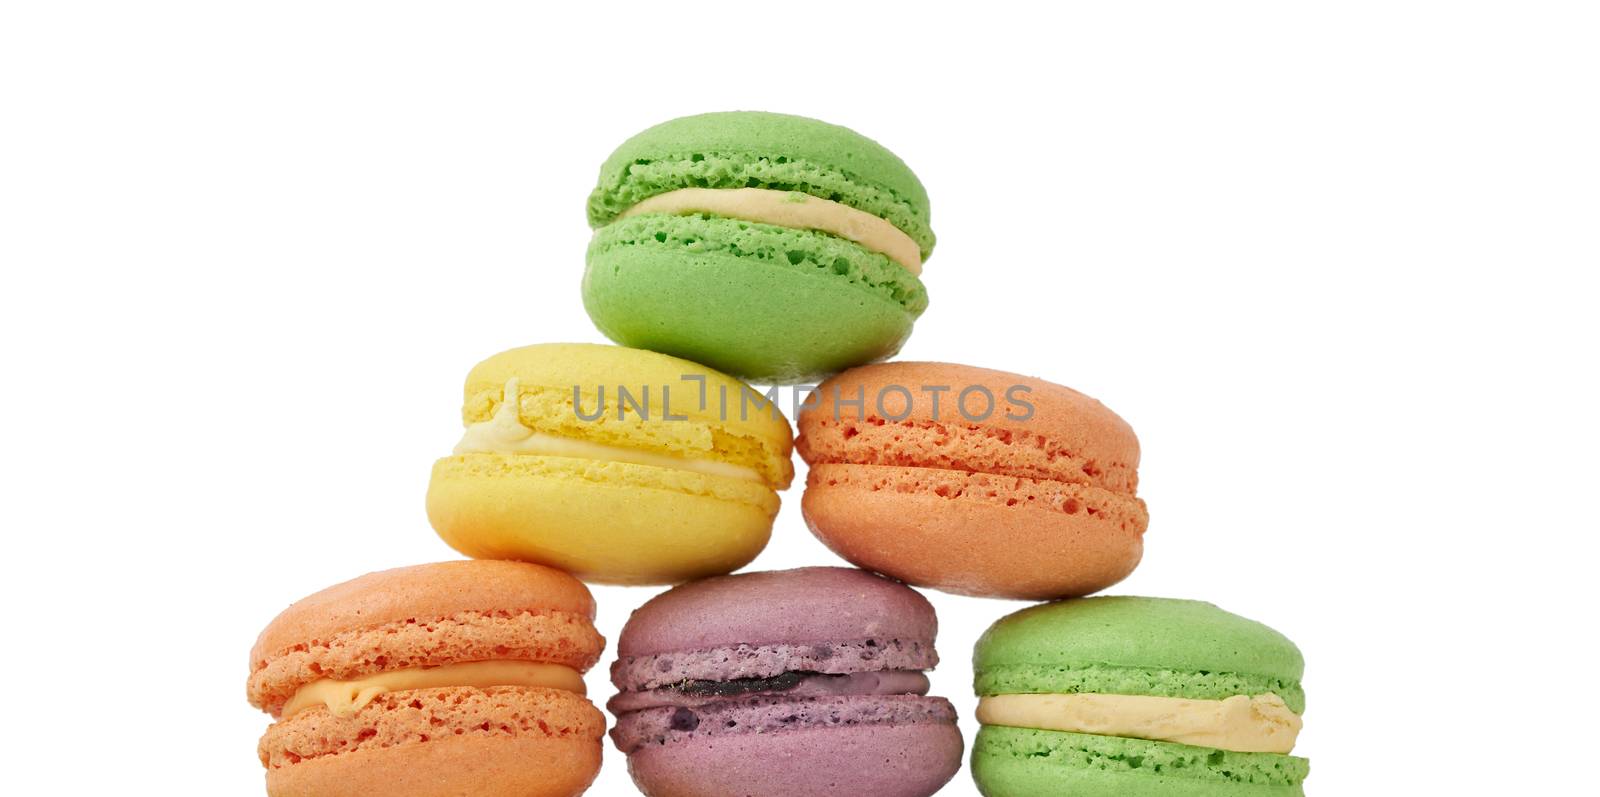 round baked multi-colored almond flour cakes macarons, dessert isolated on a white background